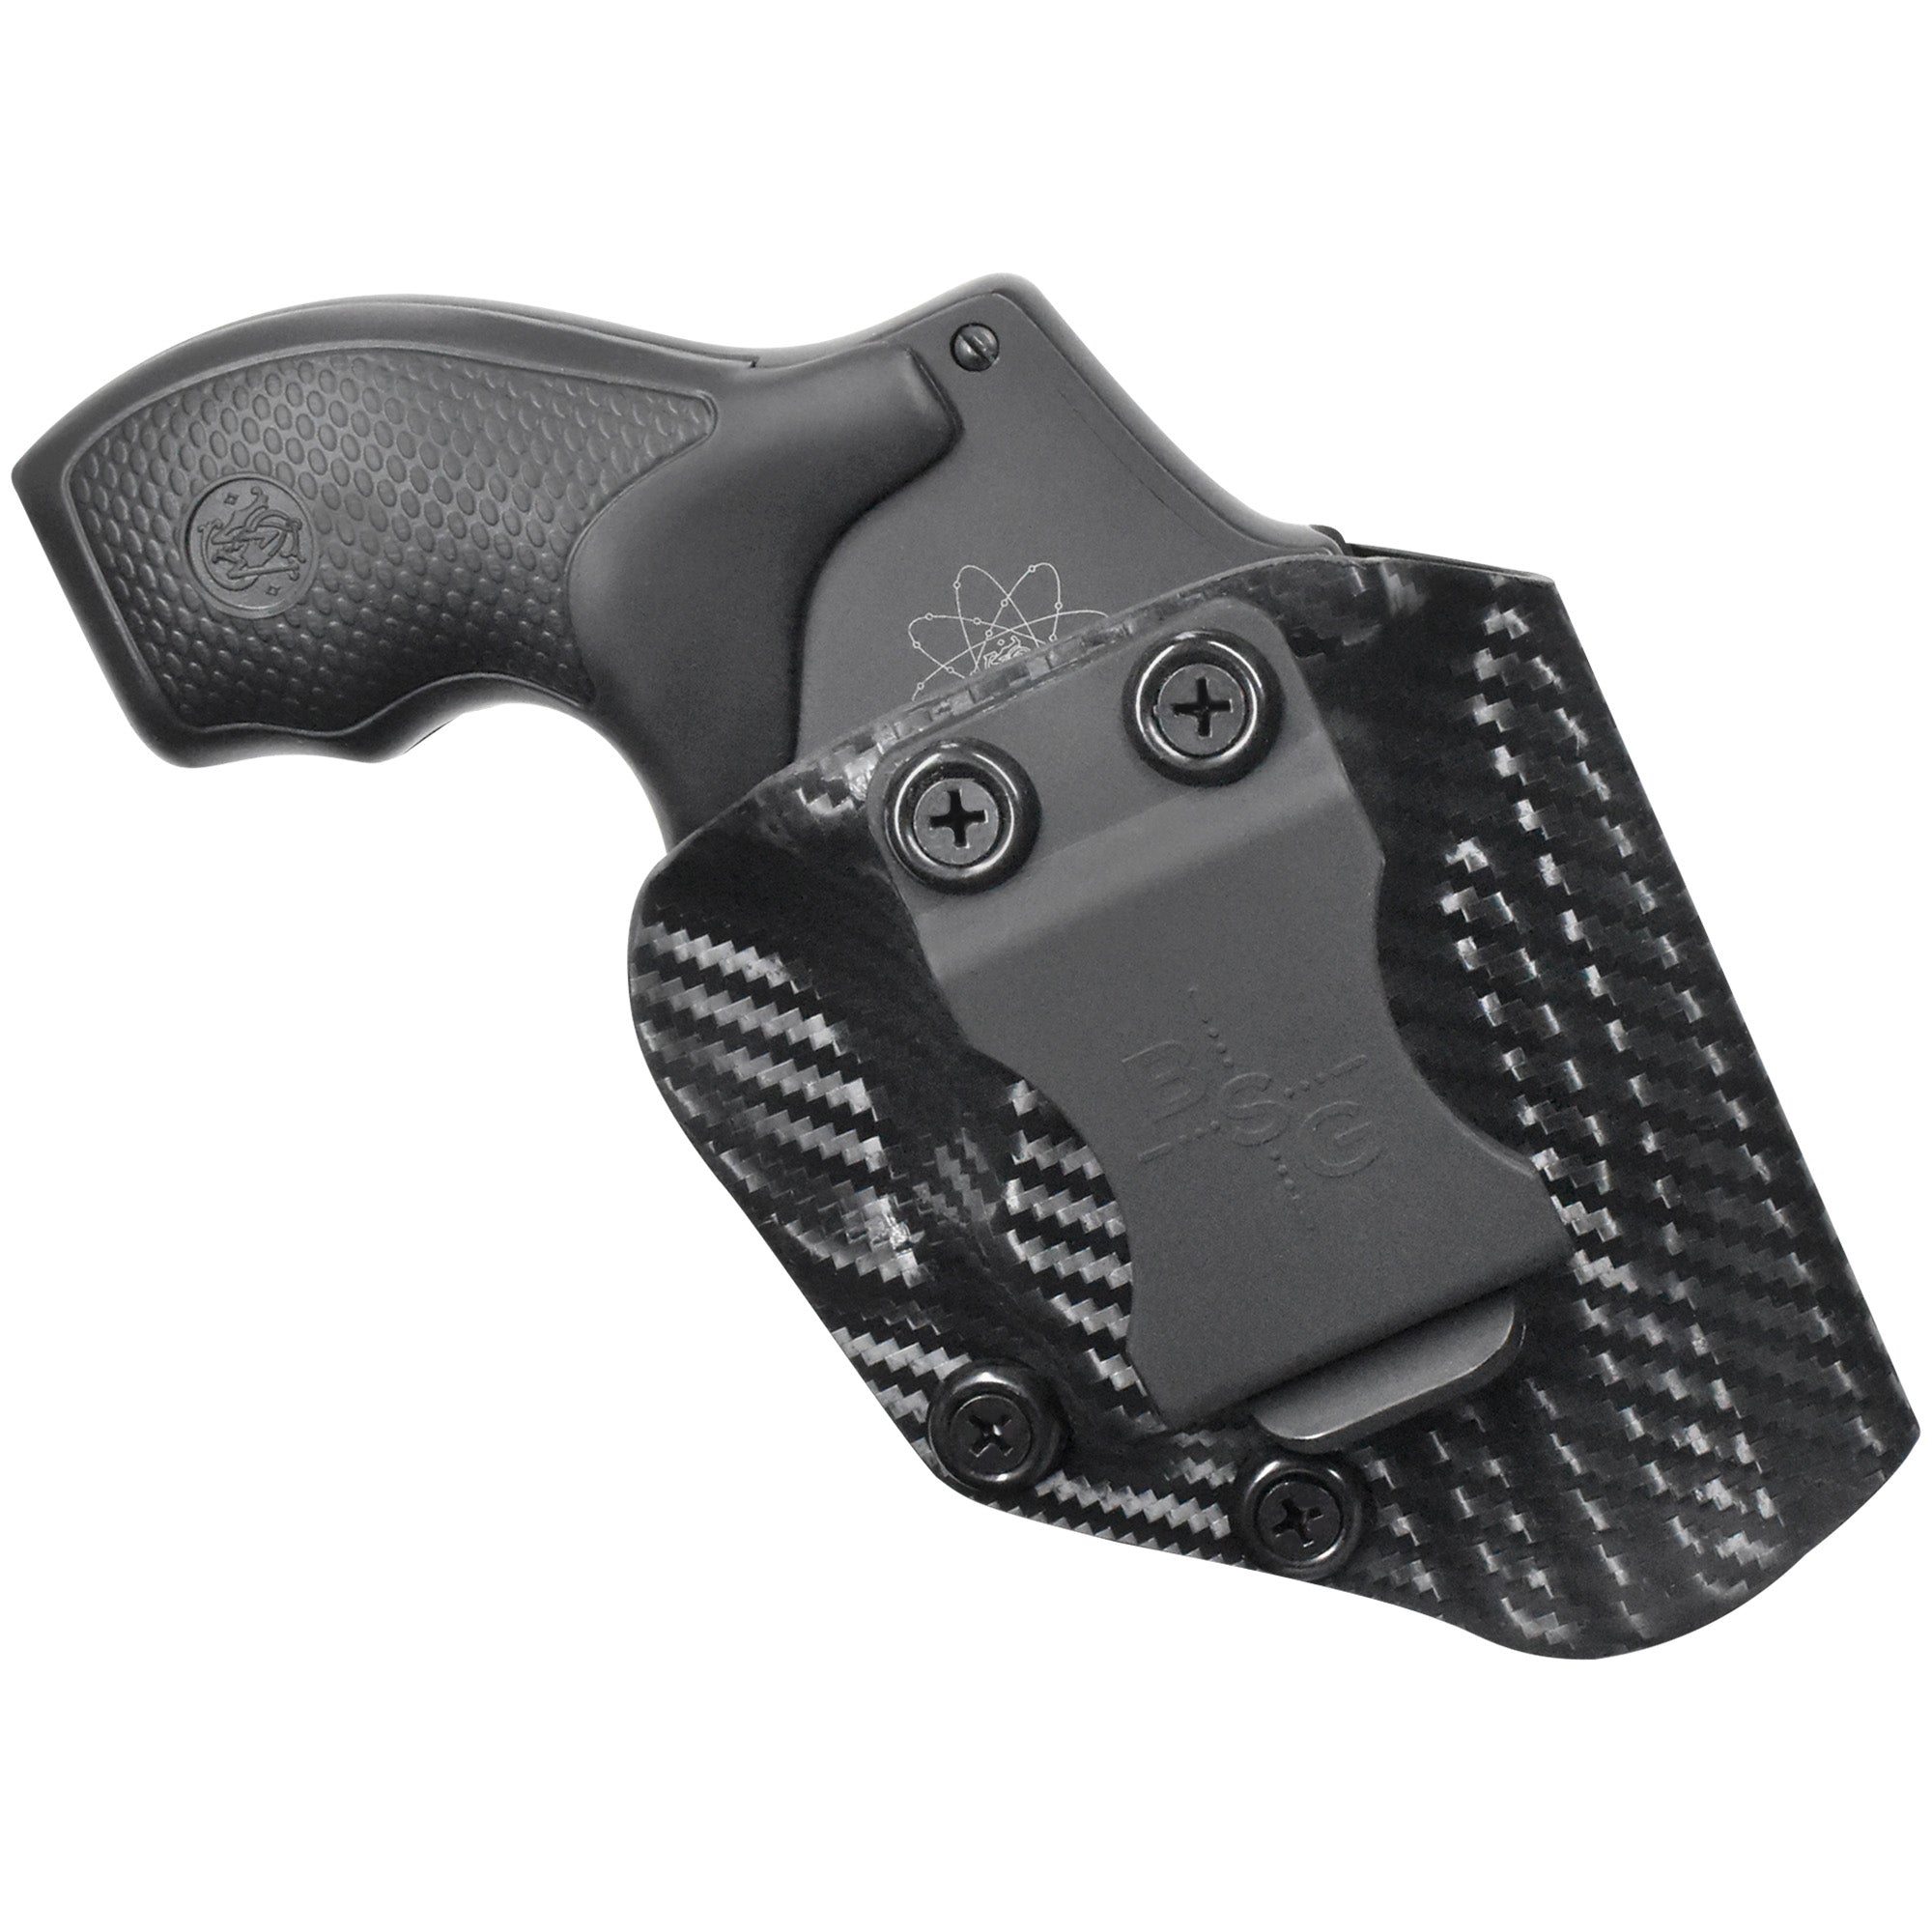 Smith & Wesson Model 340 PD IWB Sweat Guard Holster